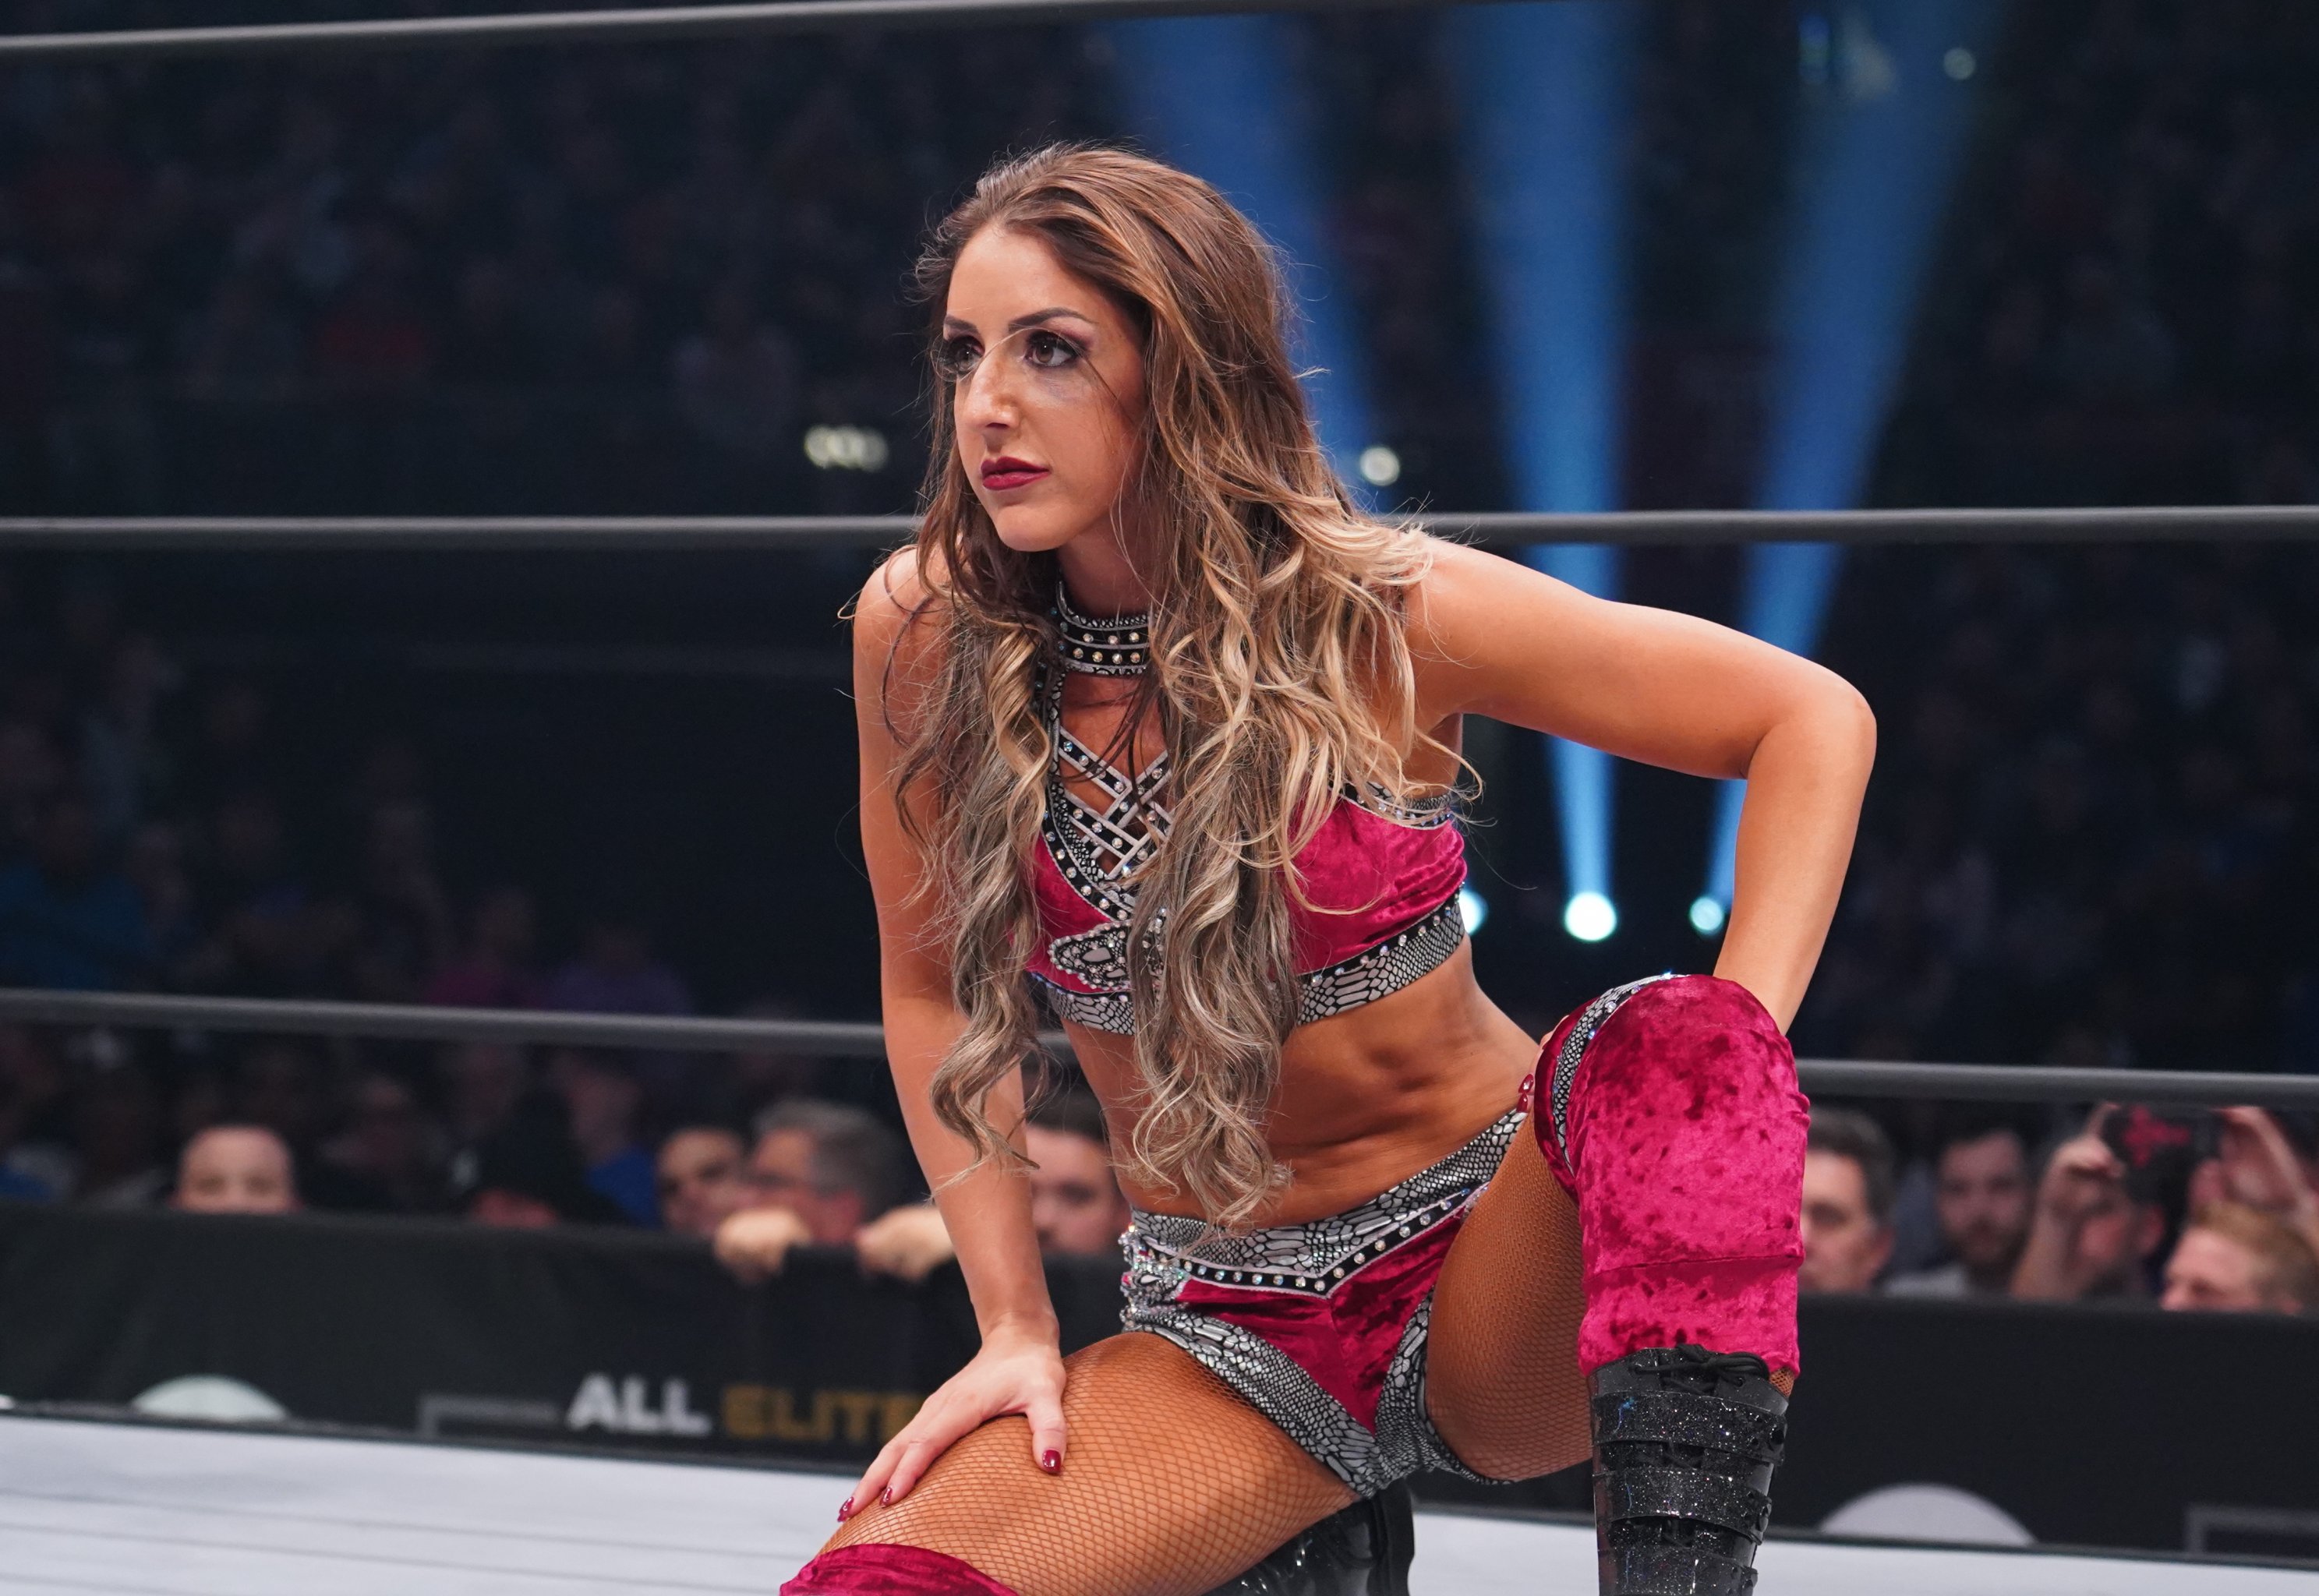 The 10 Women S Stars In Wwe And Aew Who Will Dominate The Next Decade Bleacher Report Latest News Videos And Highlights